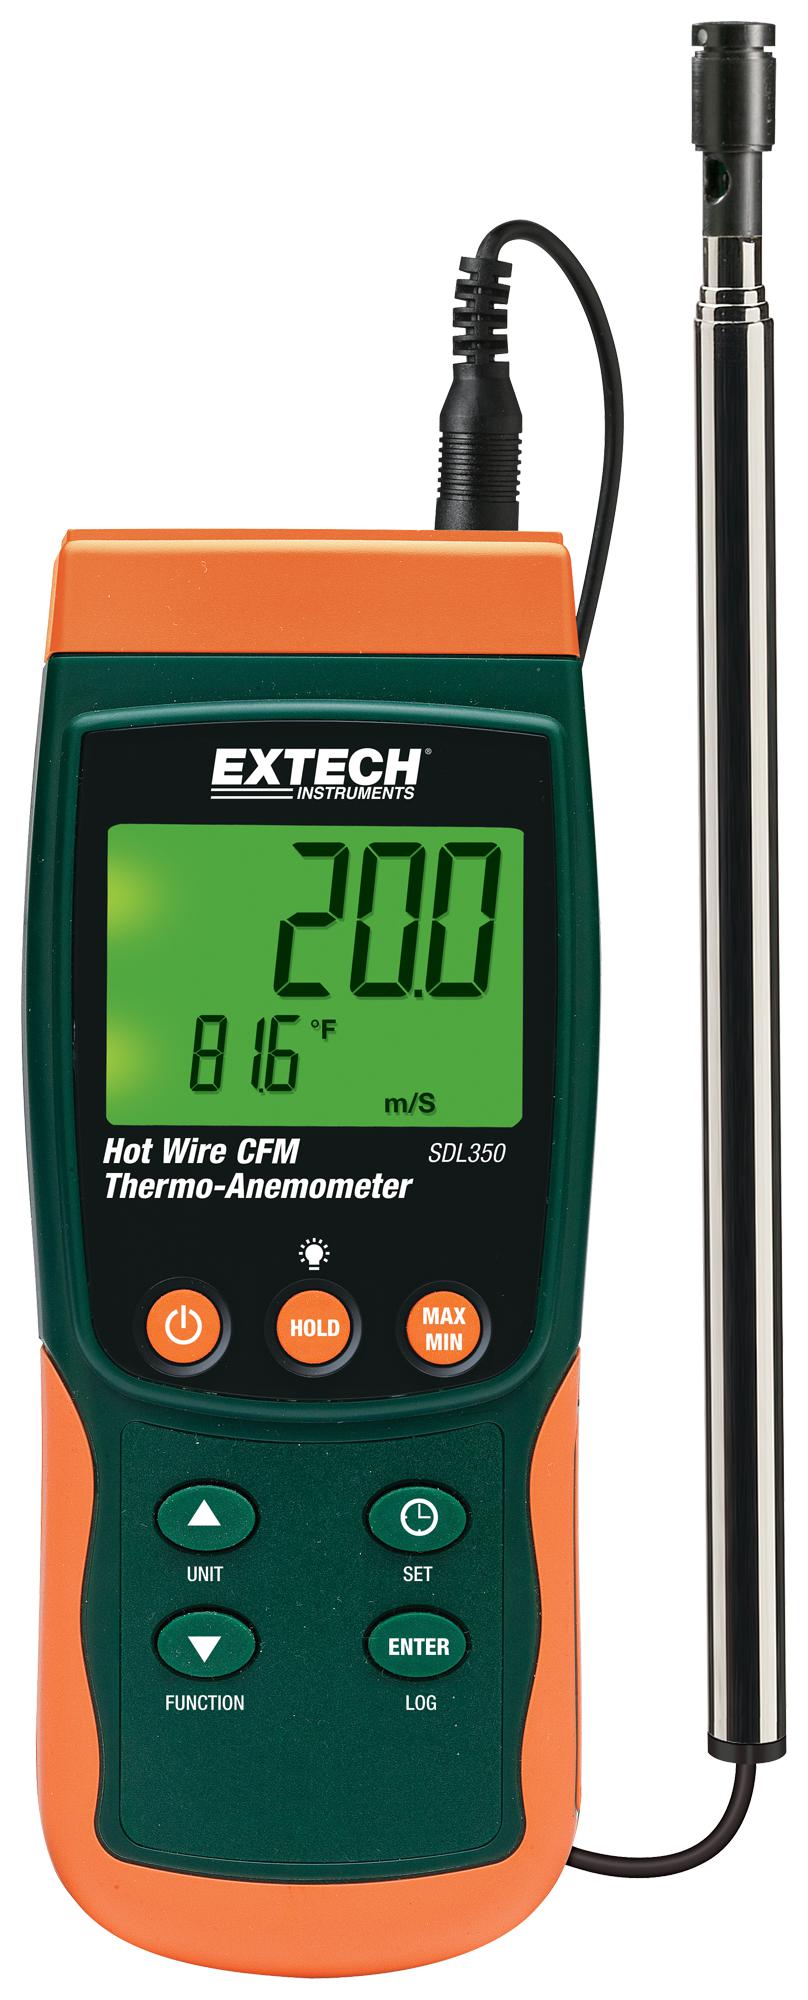 SDL350 THERMO-ANEMOMETER/DATALOGGER, 0.2-25M/S EXTECH INSTRUMENTS